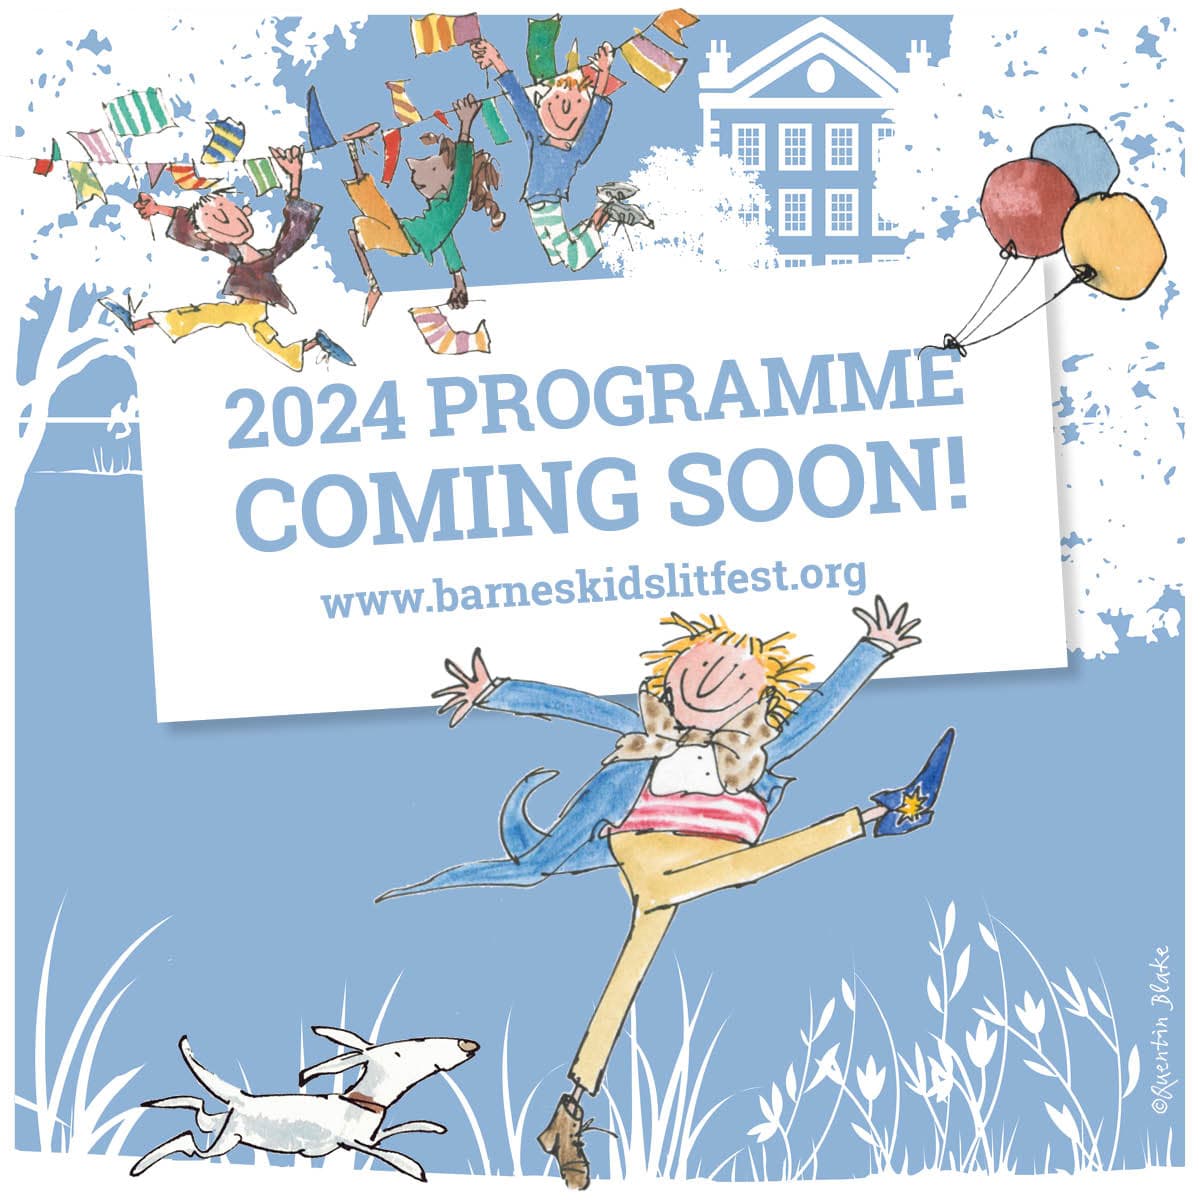 📺STAY TUNED! 2024 Programme announcement coming your way Monday 22 April! barneskidslitfest.org